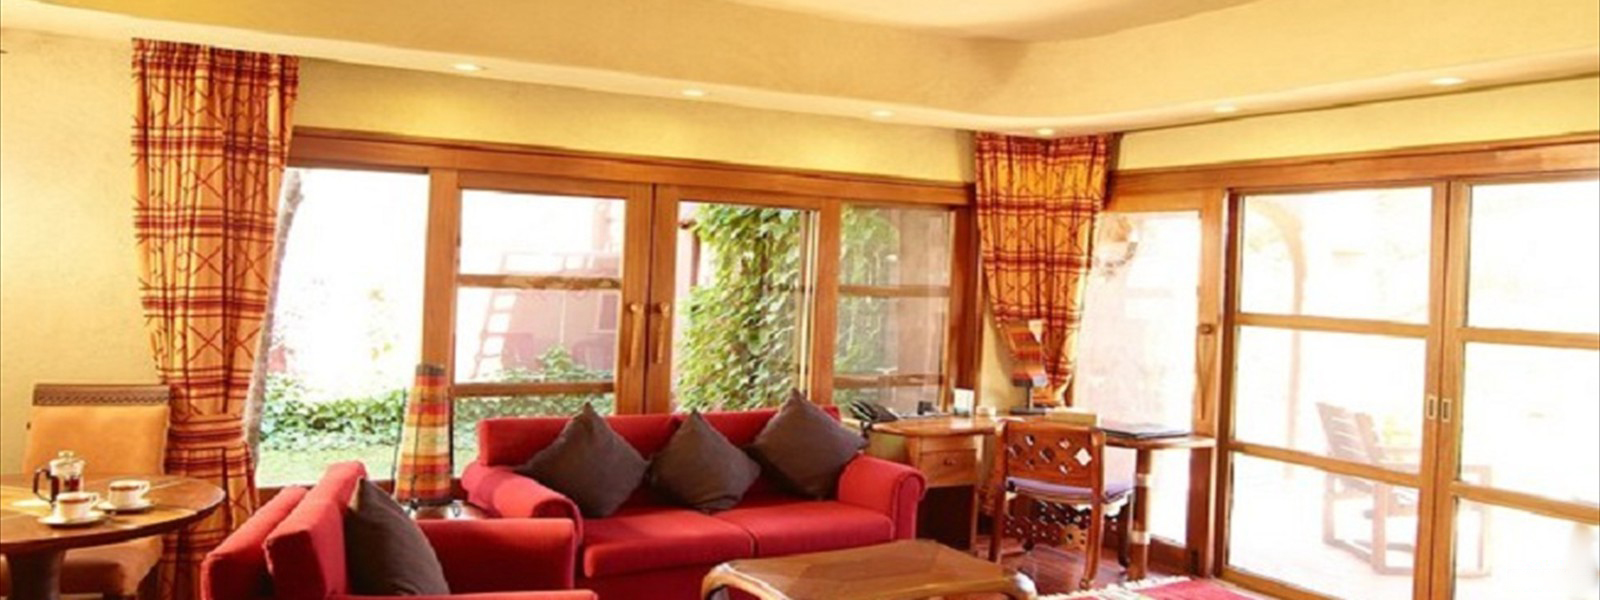 AMBOSELI NATIONAL PARK ATTRACTIONS, ATTRACTIONS AMBOSELI NATIONAL PARK, ACTIVITIES AMBOSELI NATIONAL PARK, AMBOSELI NATIONAL PARK ACTIVITIES,MOST POPULAR LODGES,  GAME VIEWING, BEST LODGES AMBOSELI NATIONAL PARK, POPULAR LODGES, AMBOSELI SERENA, KIBO VILLA, AMBOSELI TAWI LODGE, AMBOSELI SOPA LODGE, KIBO SAFARI CAMP AMBOSELI, AMBOSELI SERNTRIM LODGE, AMBOSELI NATIONAL PARK, WHAT TO DO AMBOSELI NATIONAL PARK,